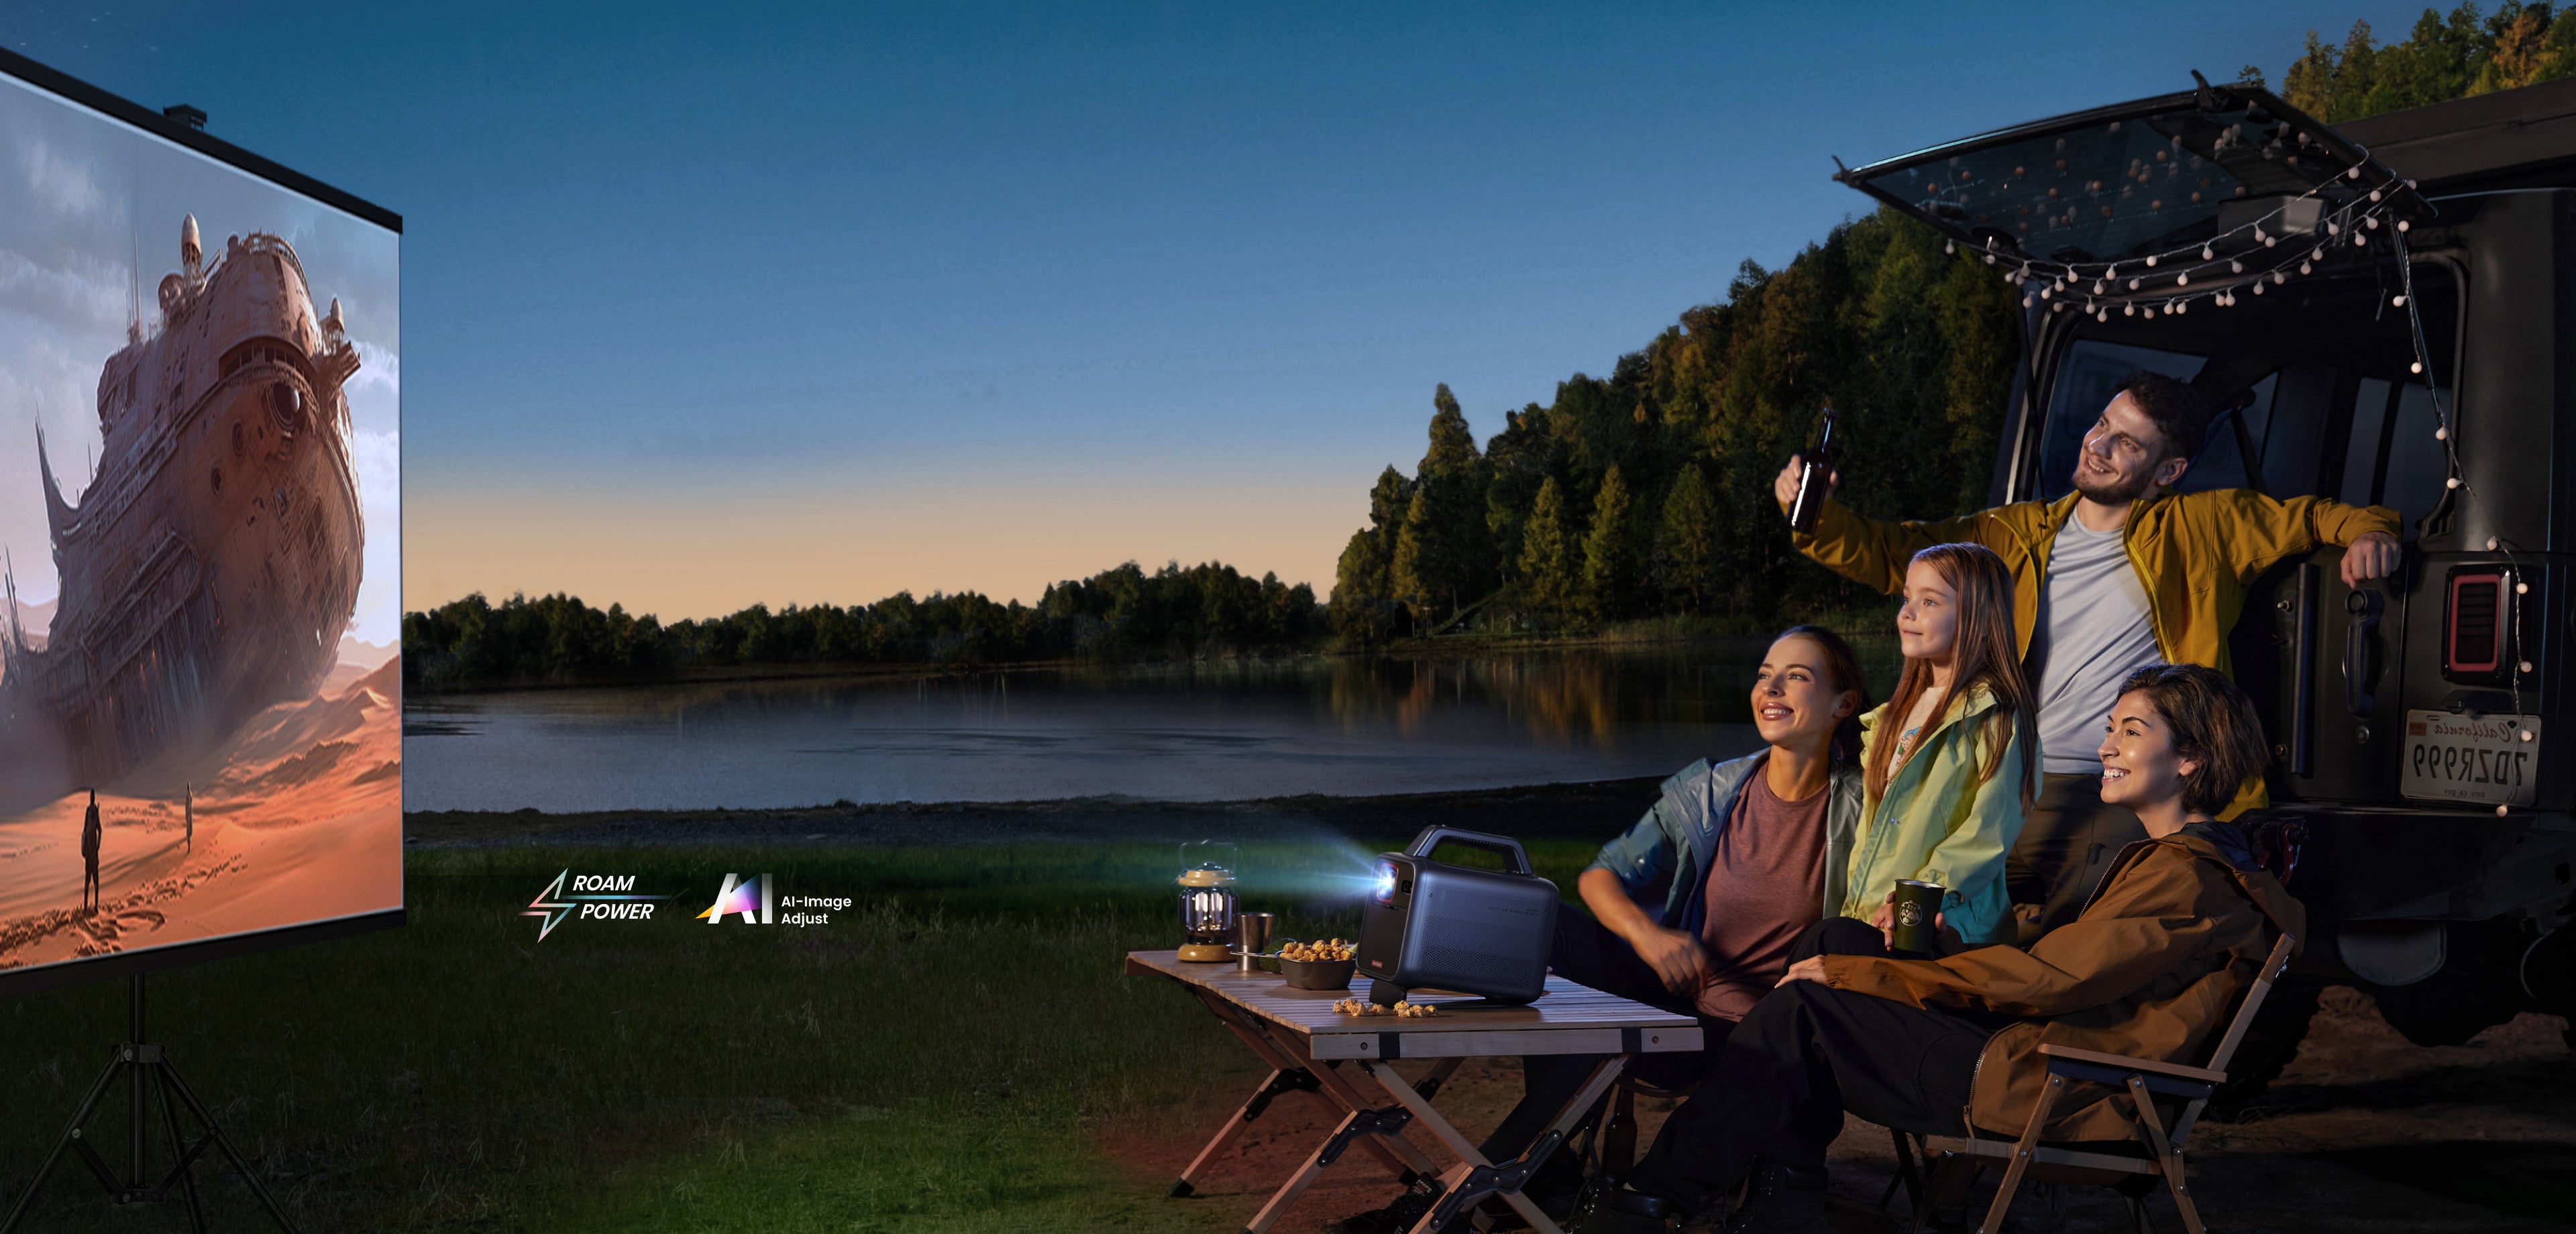 How to choose the best outdoor projector for camping?